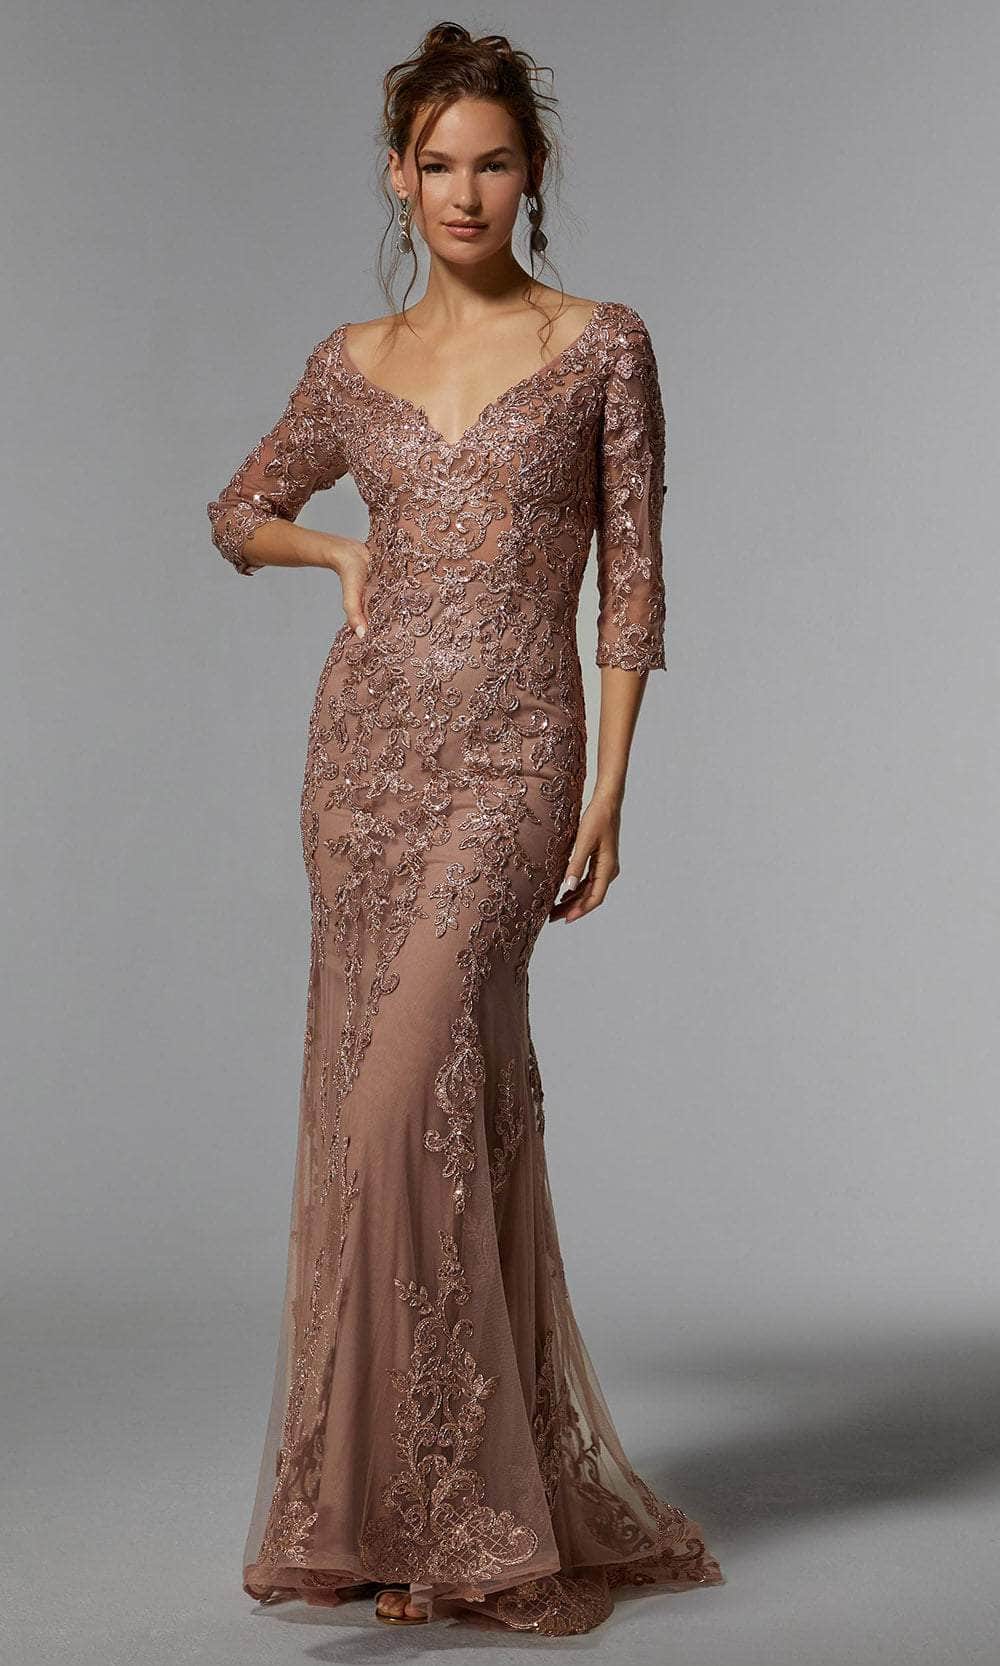 Image of MGNY By Mori Lee 72940 - Frosted Lace Evening Dress